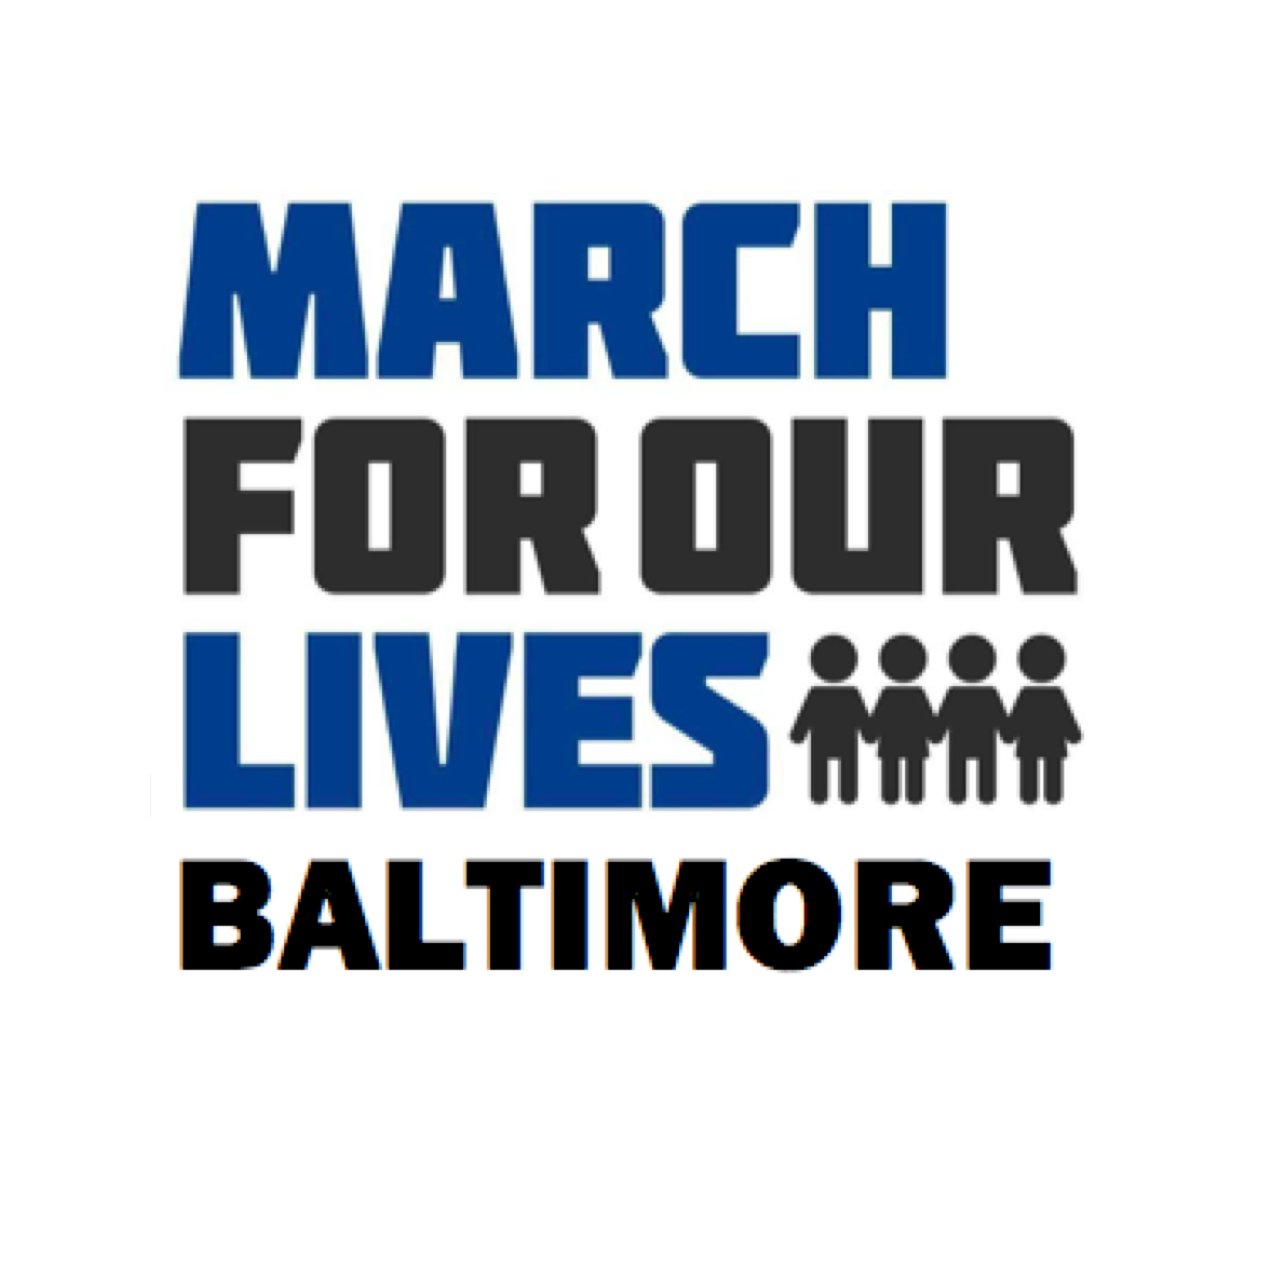 Come join us in front of Baltimore City Hall on 3/24/2018 at 10 AM. We are the city with the highest homicides per capita; make a change starting in our city!